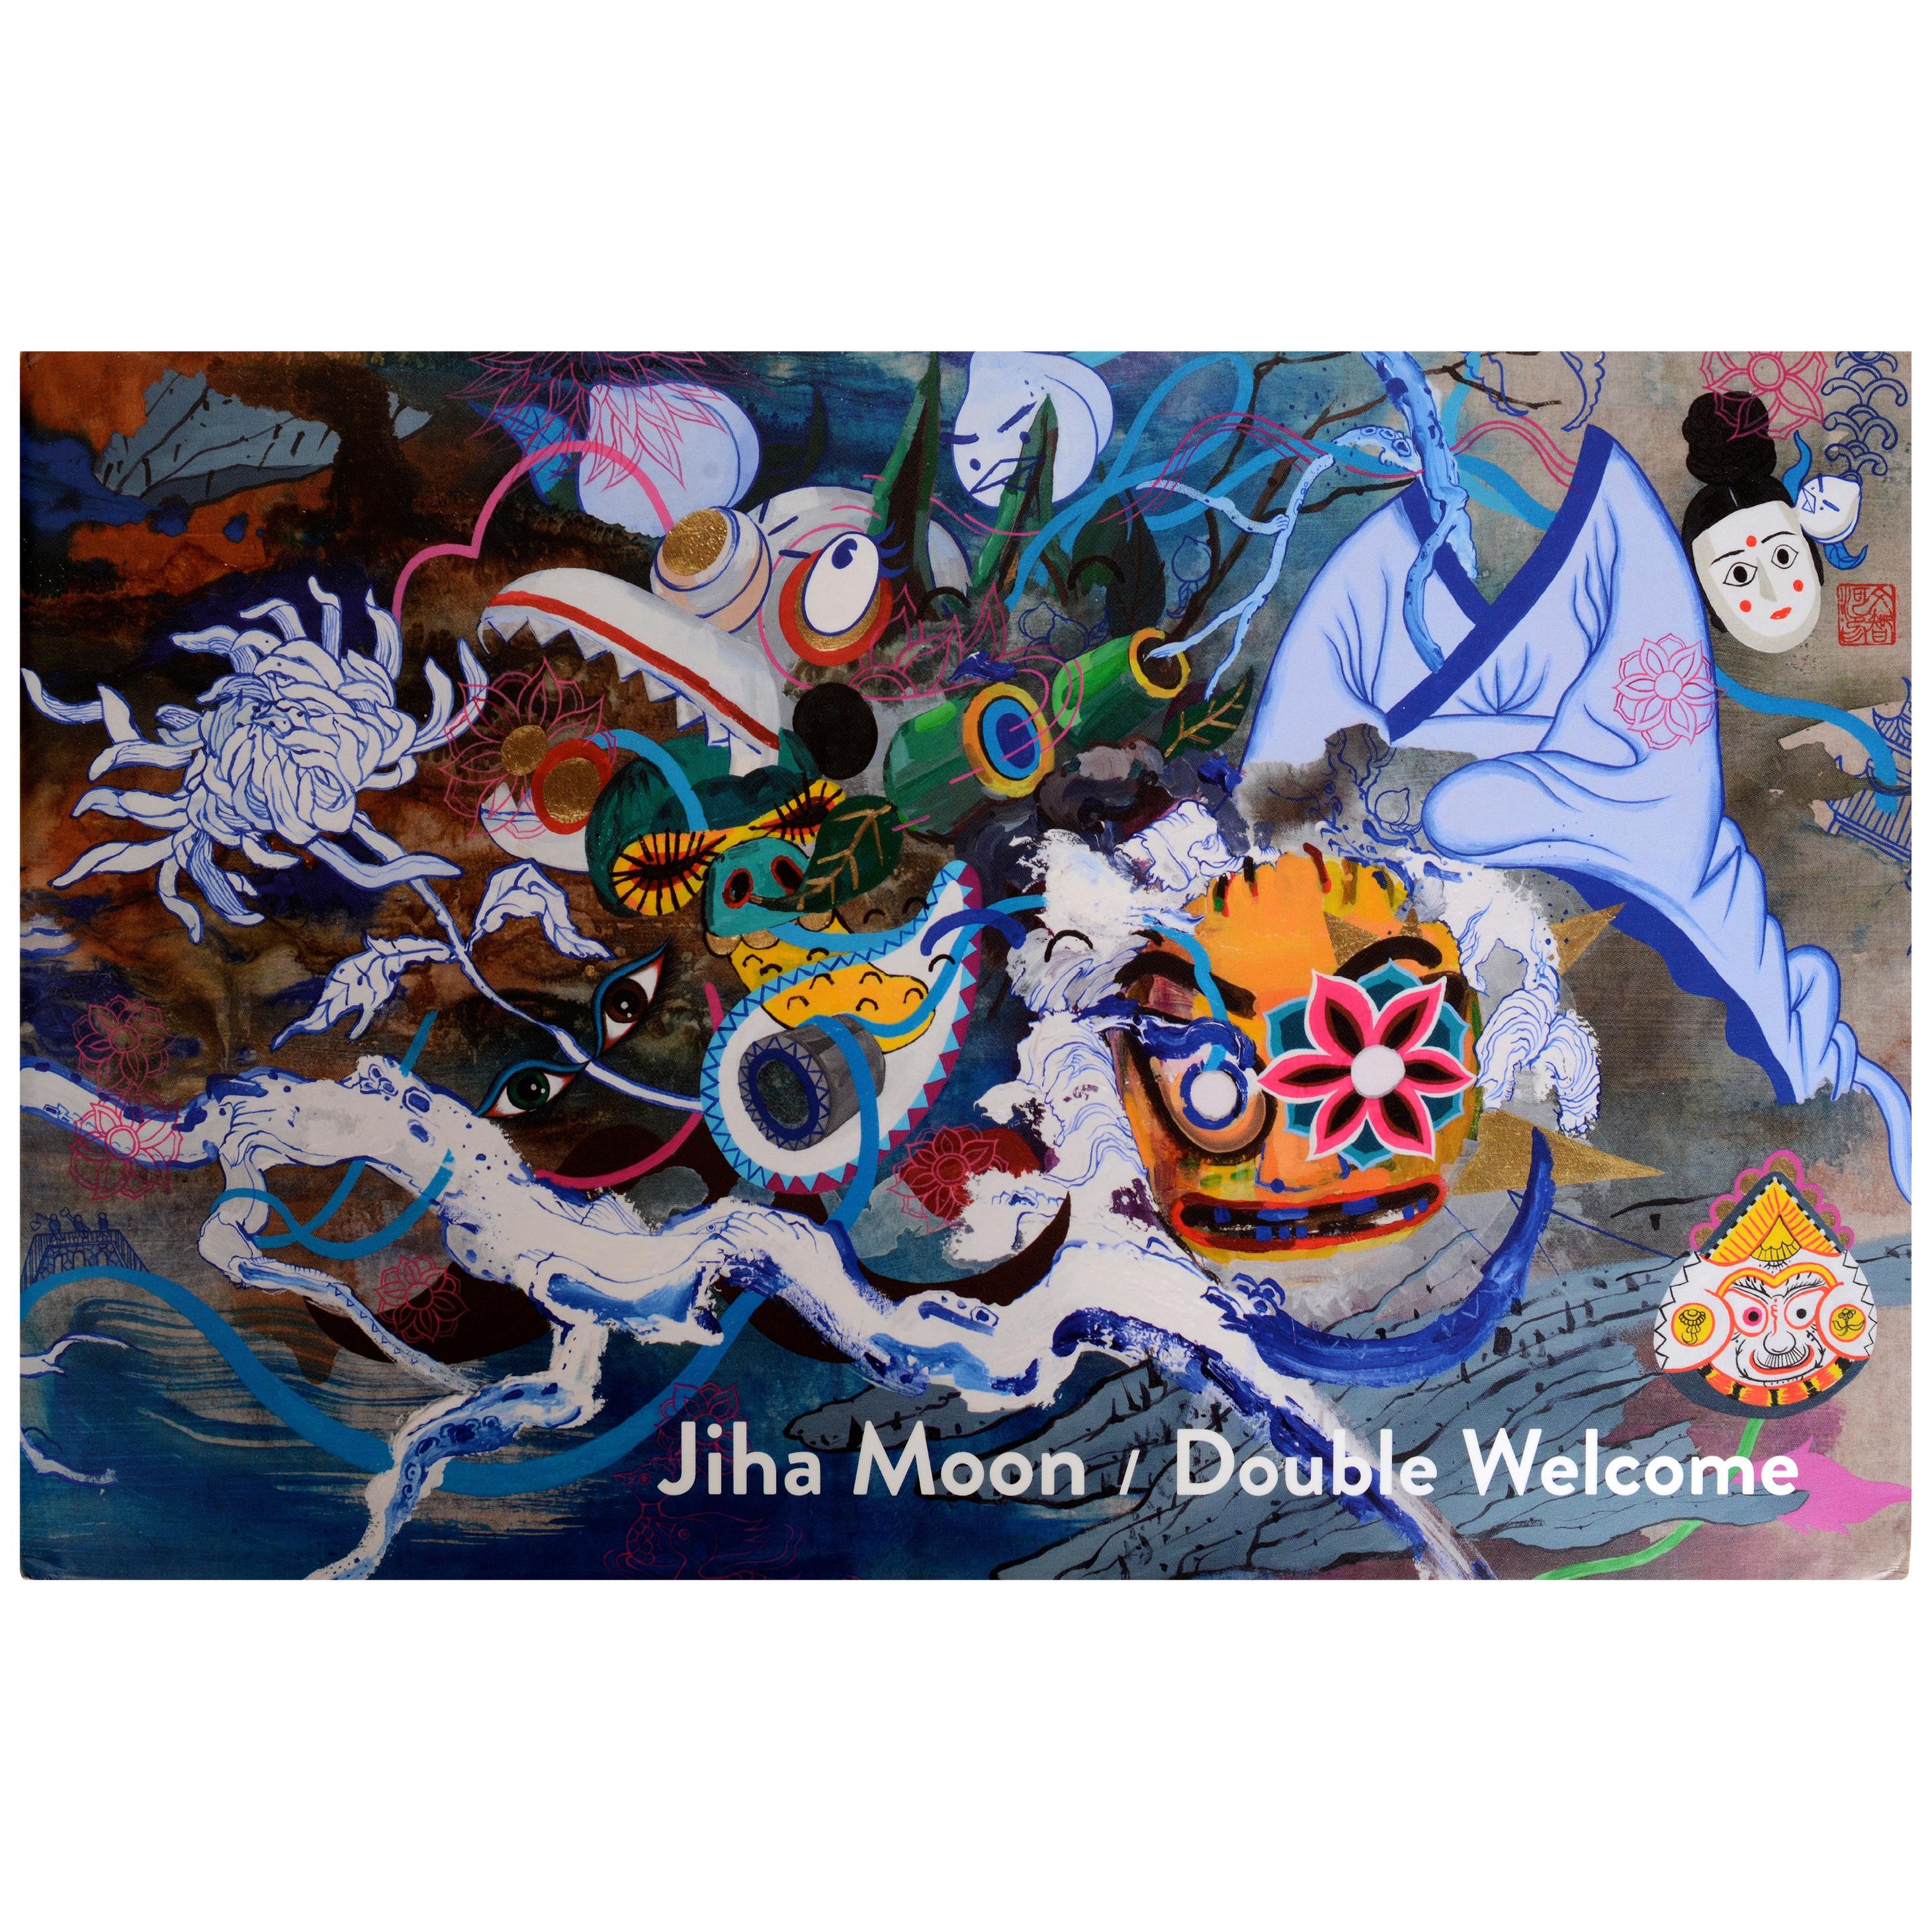 Jiha Moon, Double Welcome, Most Everyone's Mad Here, First Edition For Sale